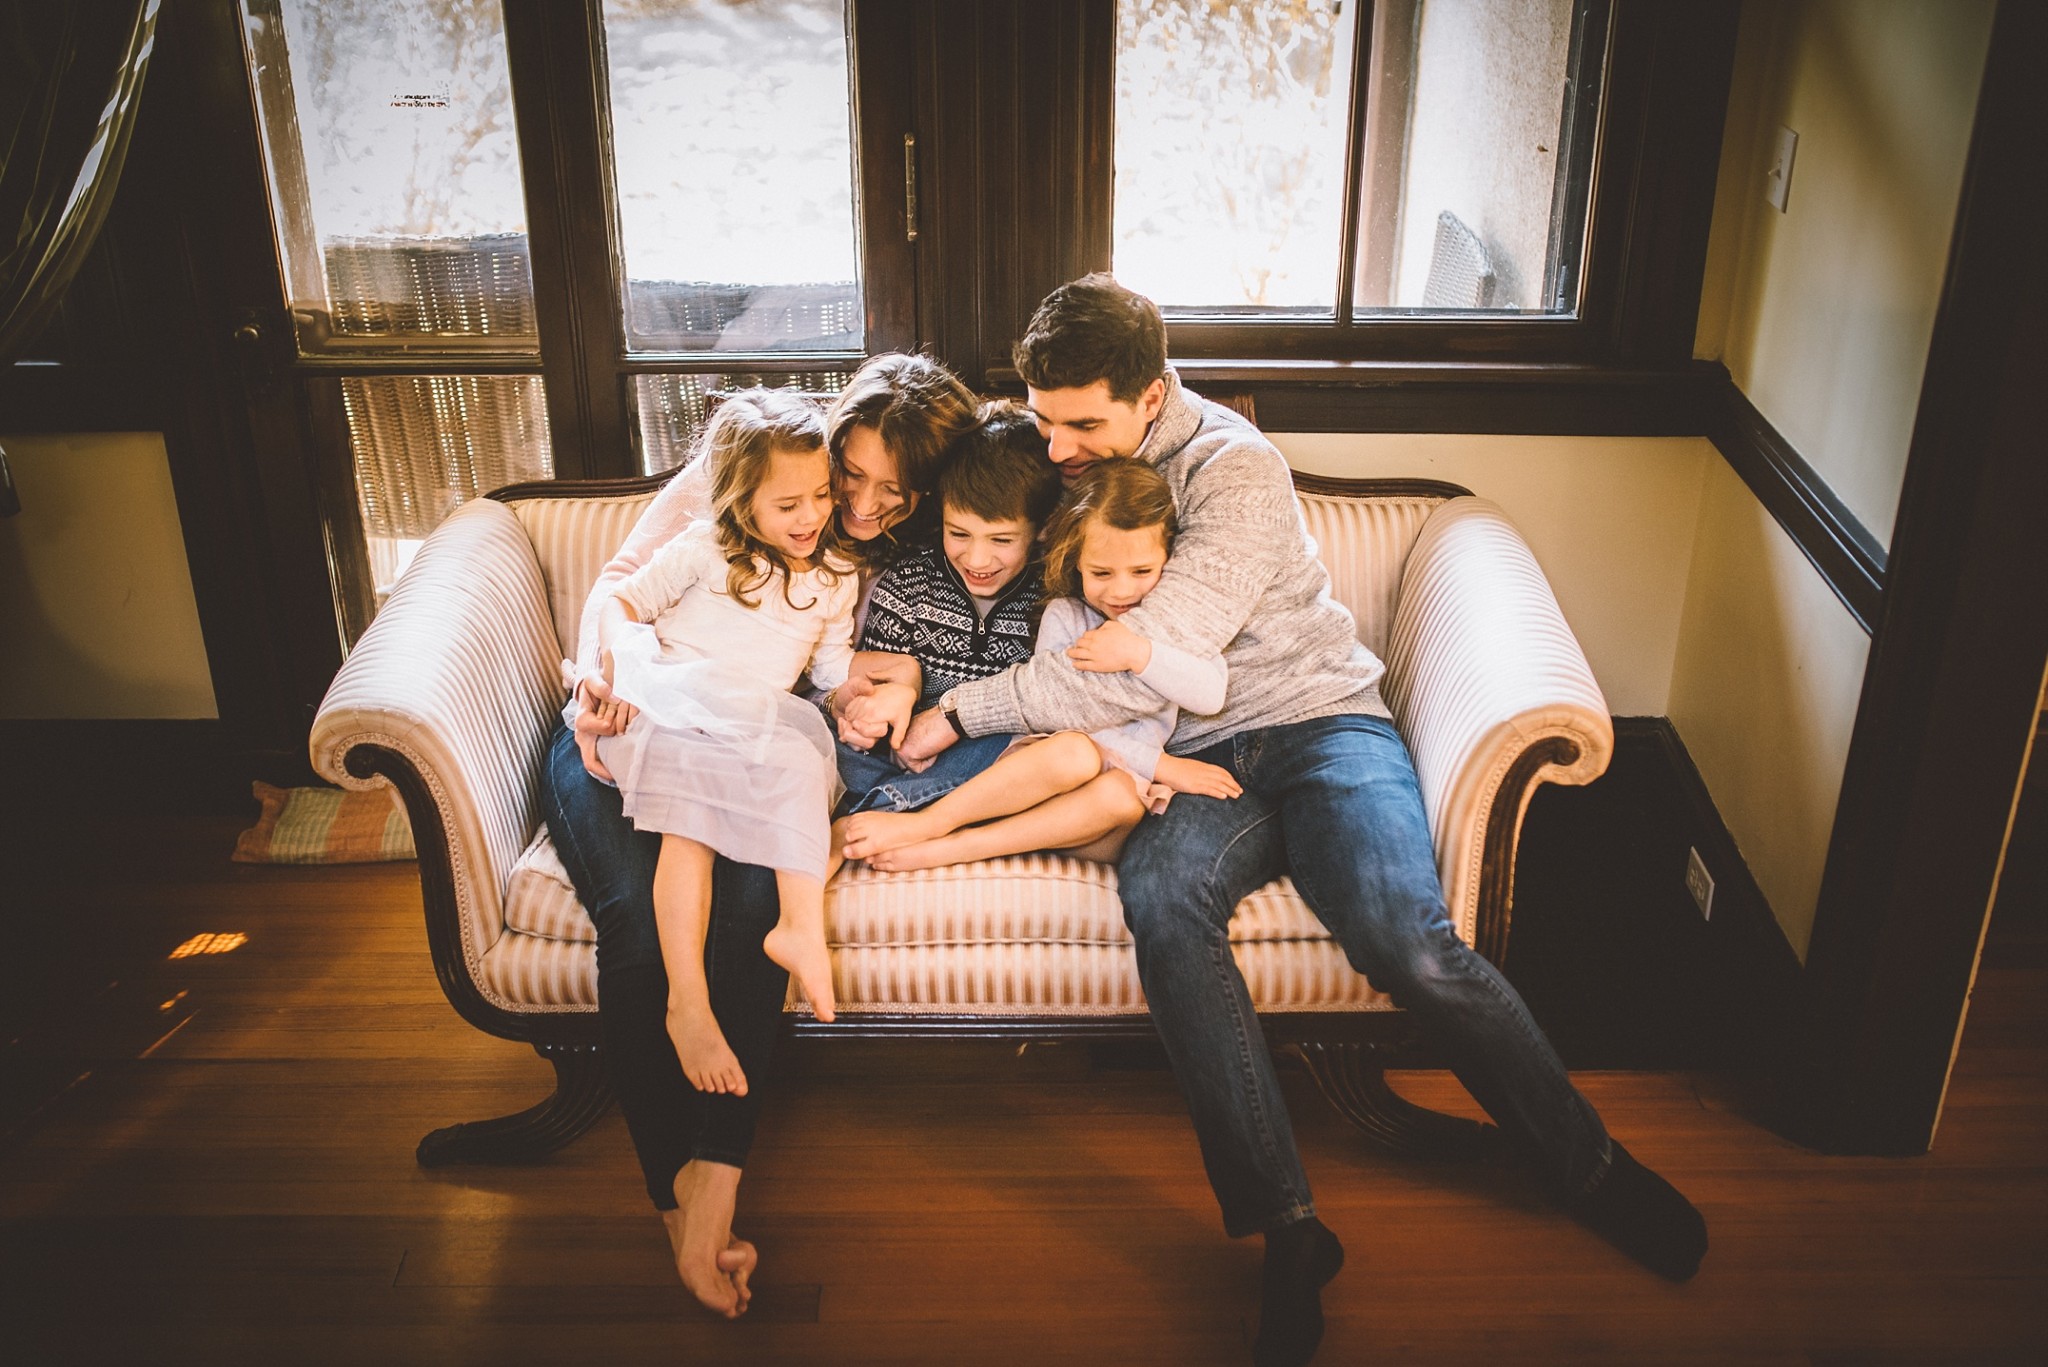 Jen Bilodeau - In-home Lifestyle Photography 